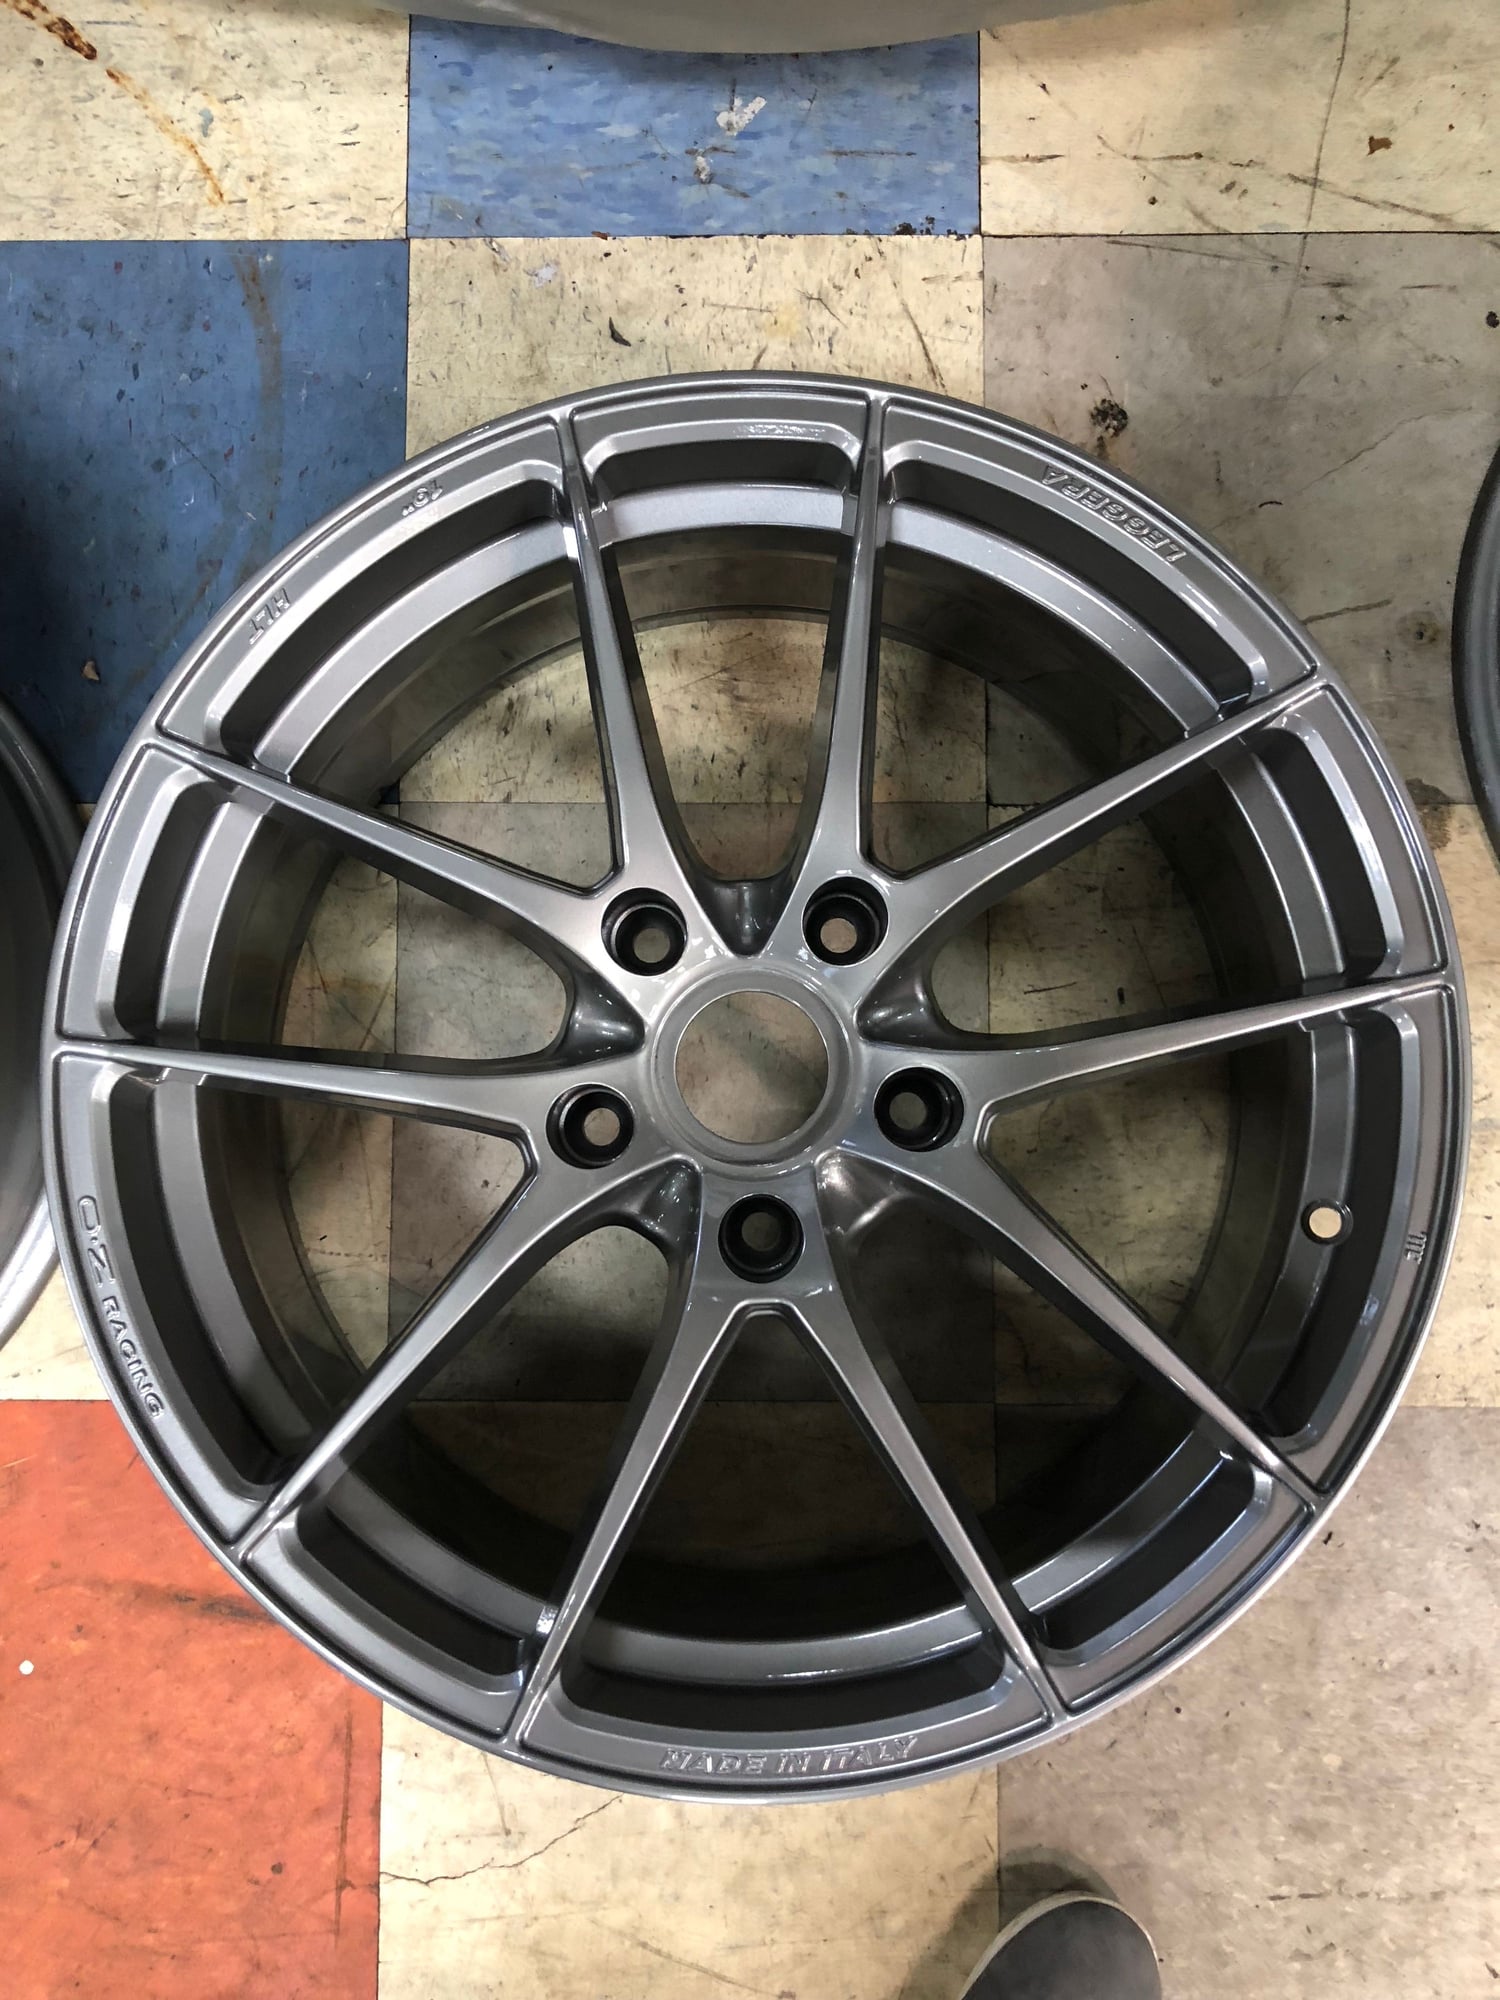 Wheels and Tires/Axles - OZ Leggera HLT Wheels (with used Pirelli Trofeo R tire) for Sale - Used - 2012 to 2016 Porsche 911 - East Rutherford, NJ 07073, United States